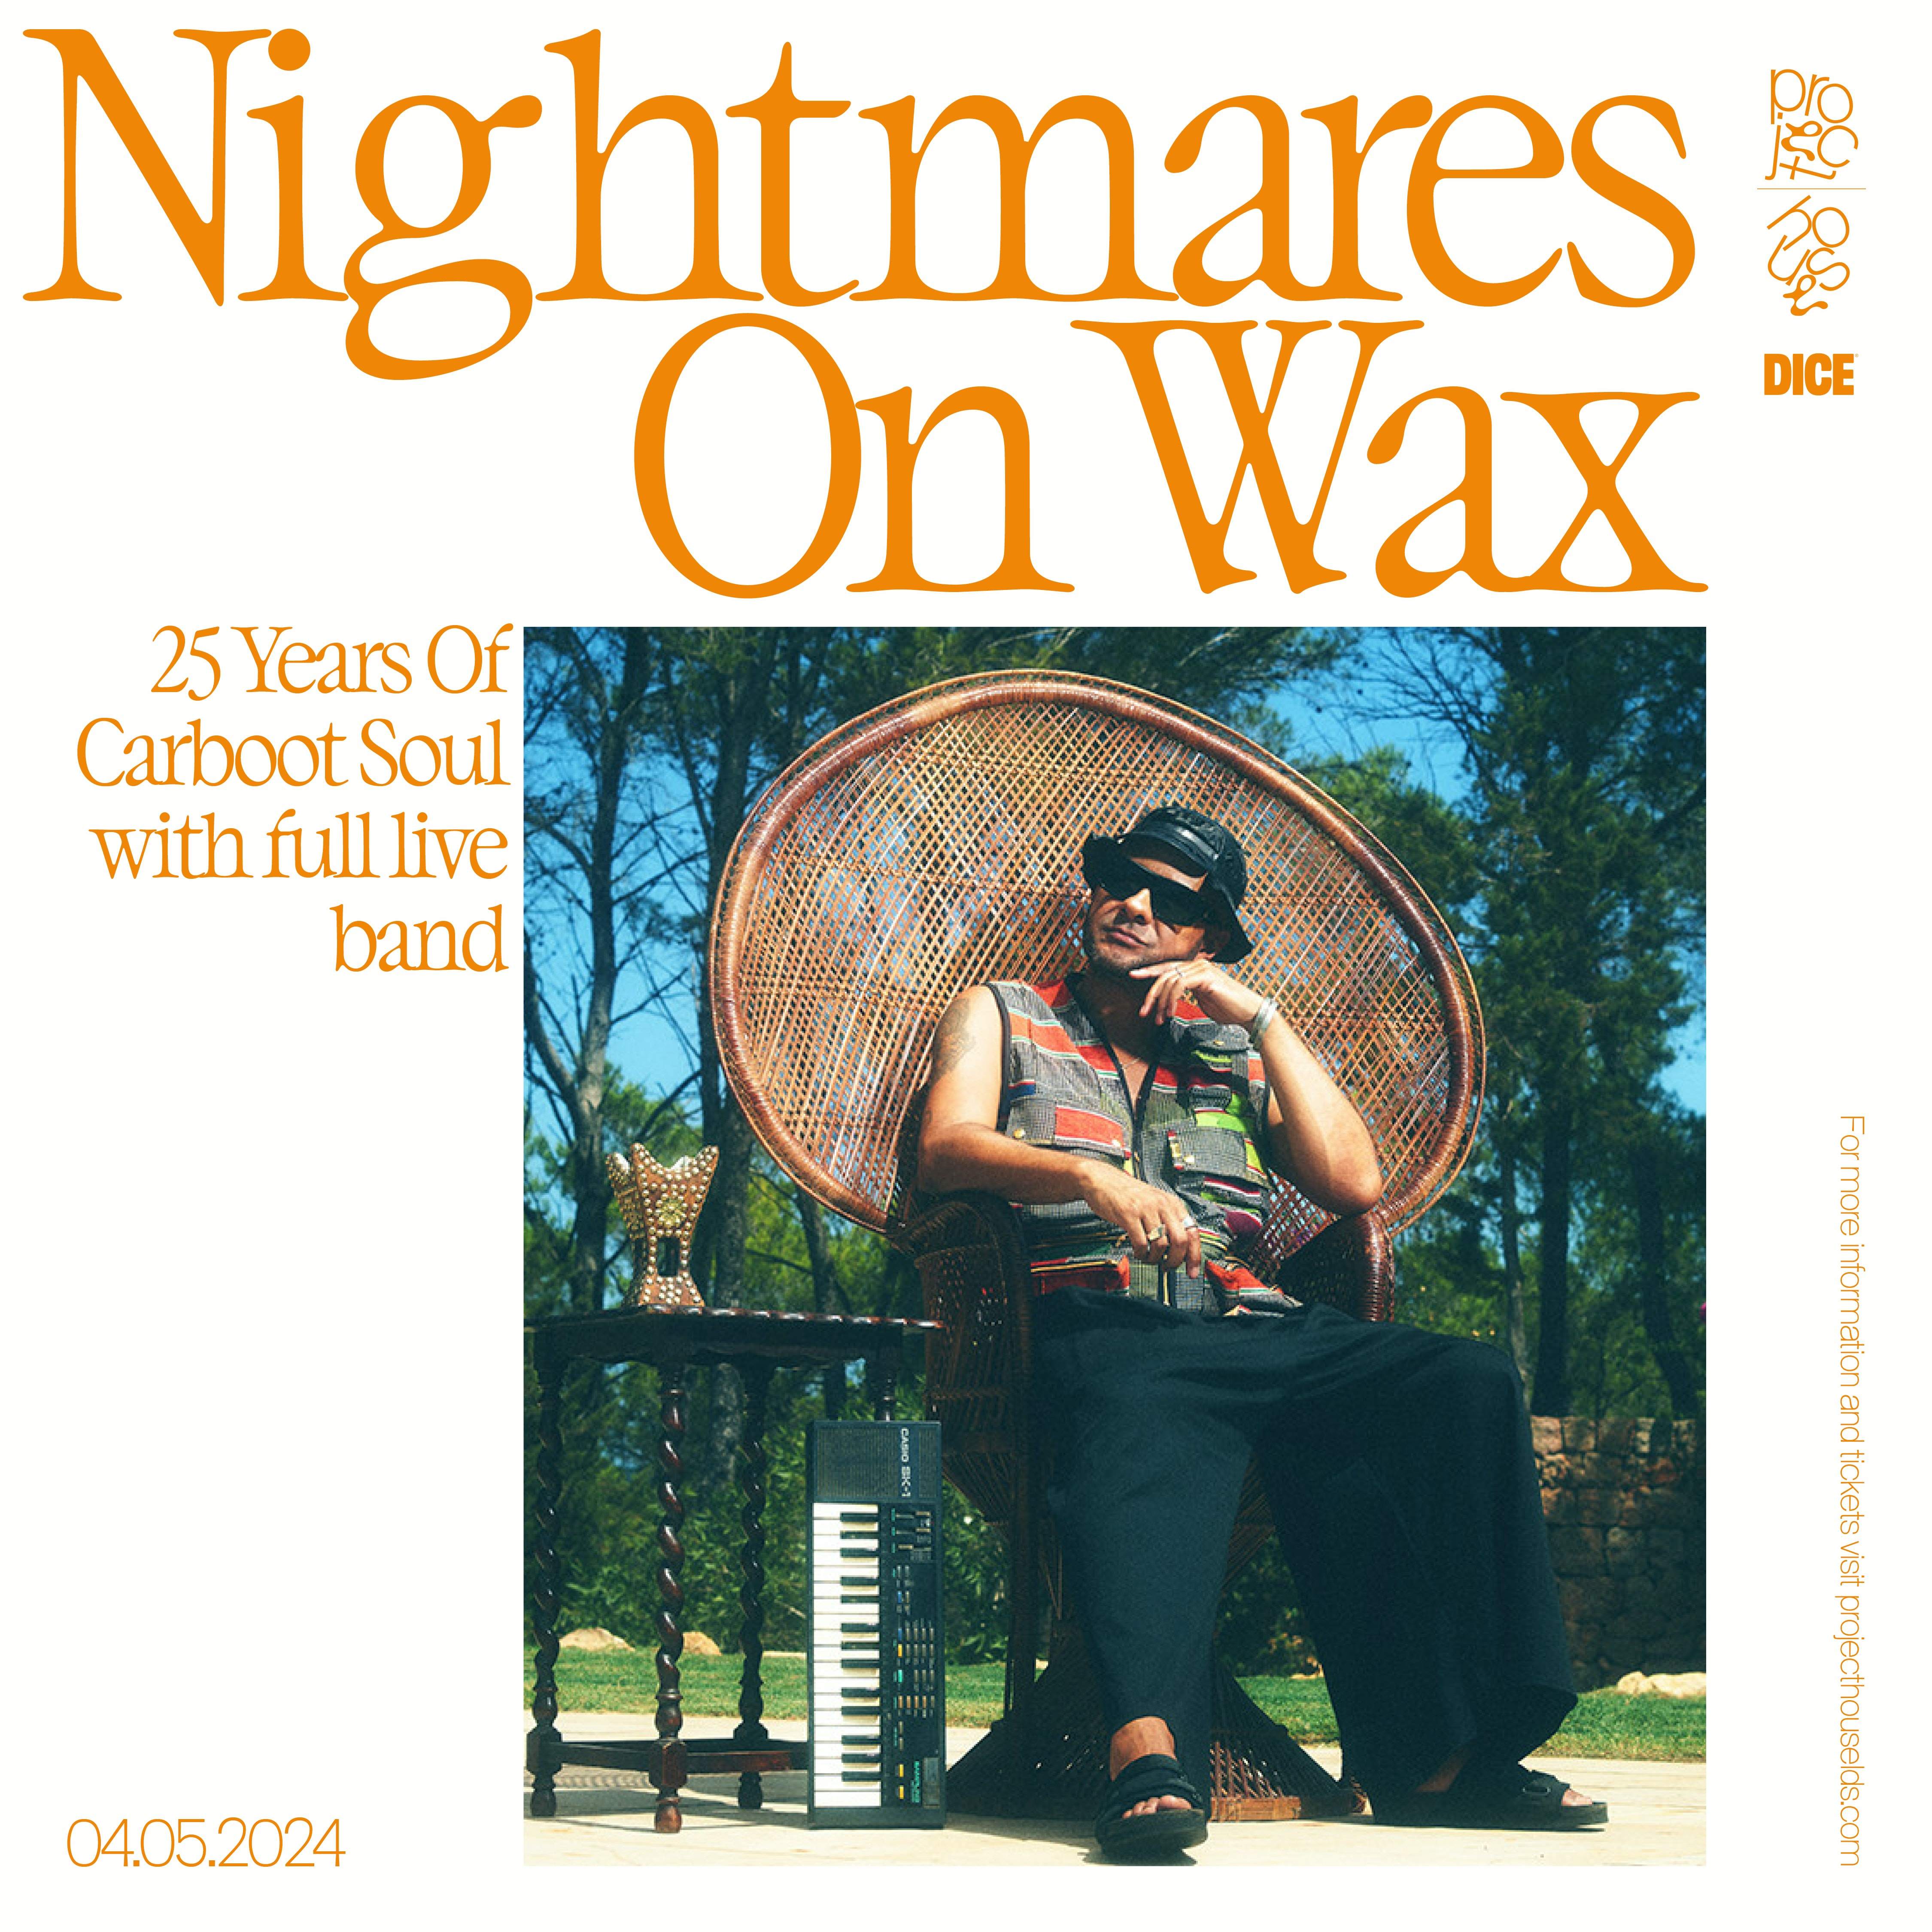 Nightmares on Wax 25 Years Of Carboot Soul with full live band - Página frontal